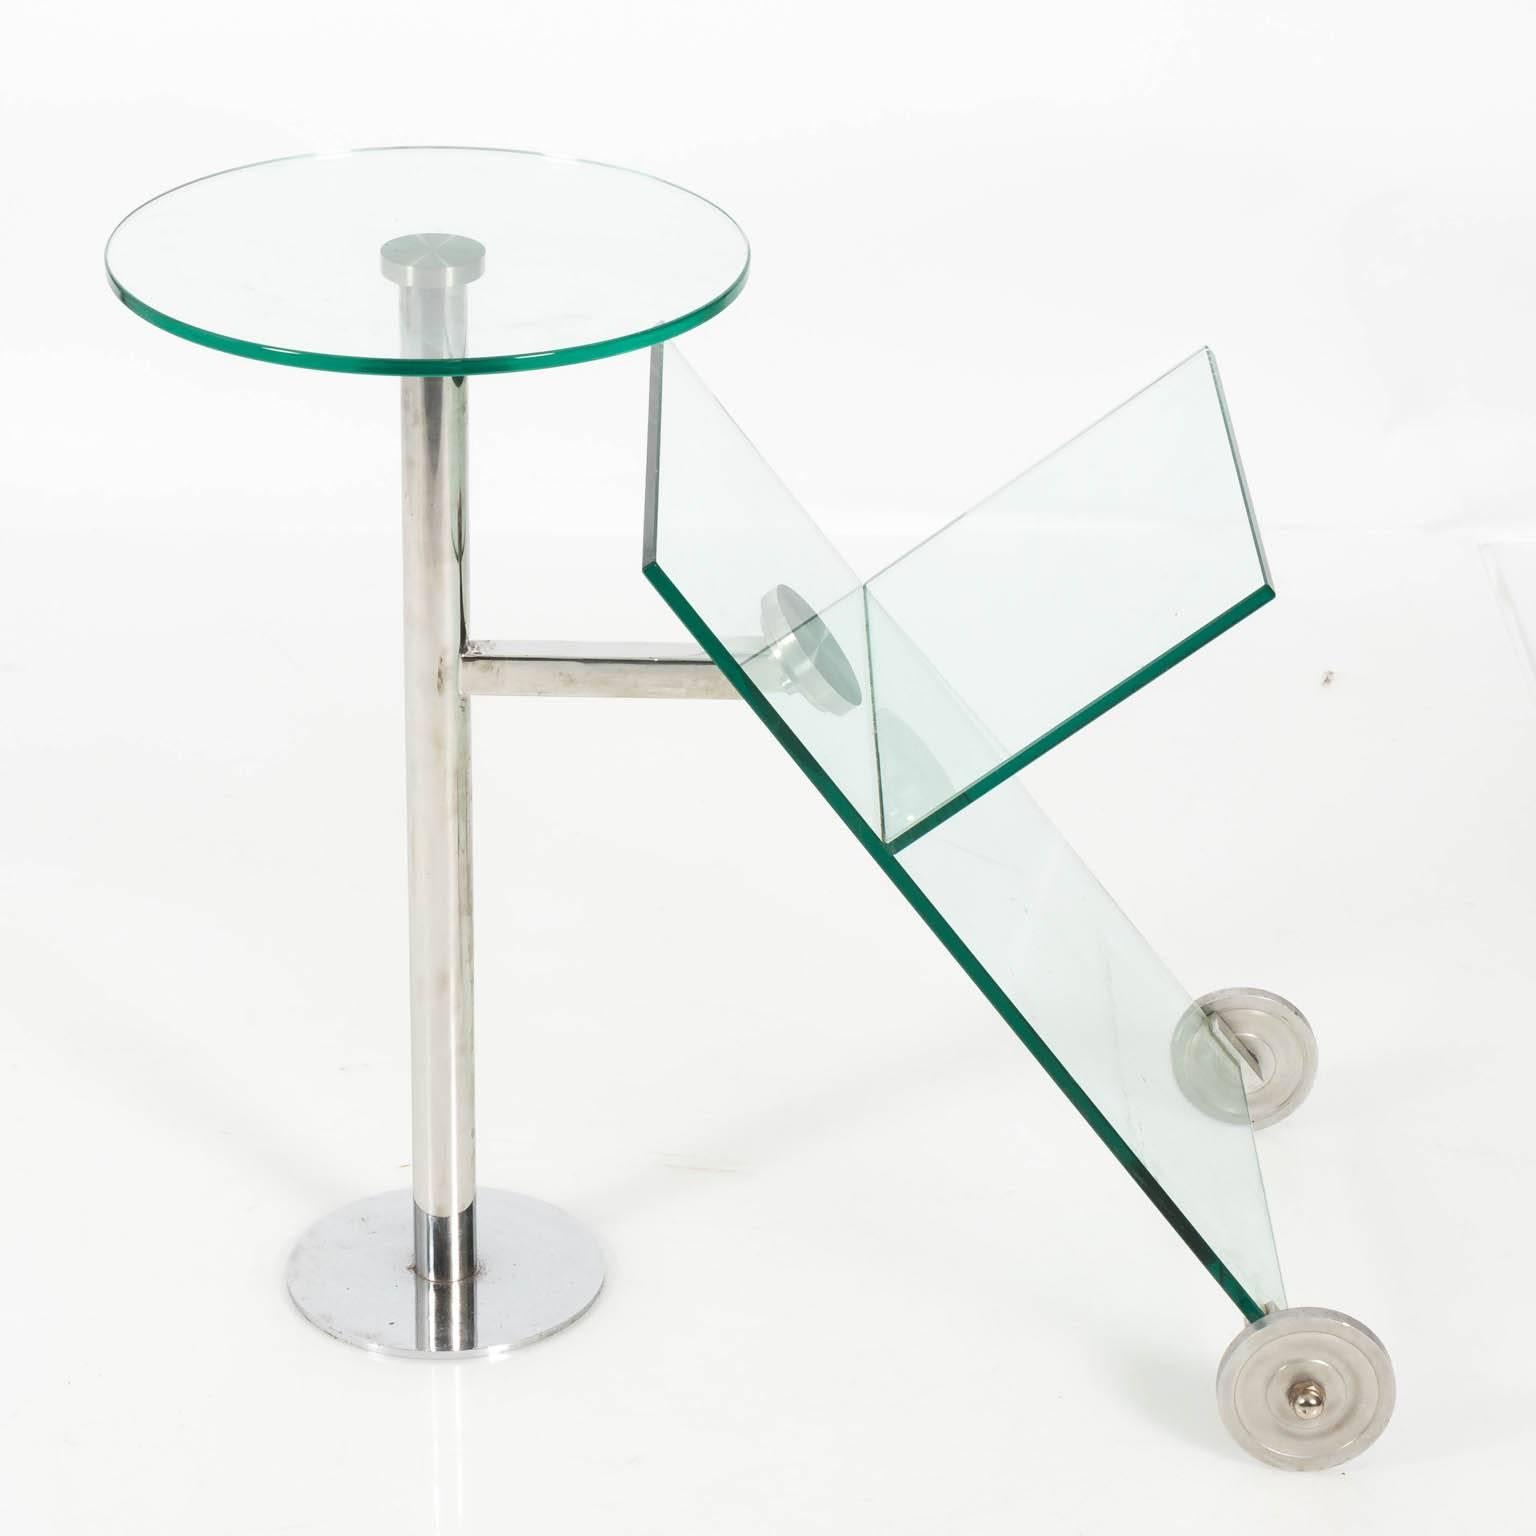 Contemporary glass and chrome base magazine stand in a polished finish on wheels.
 